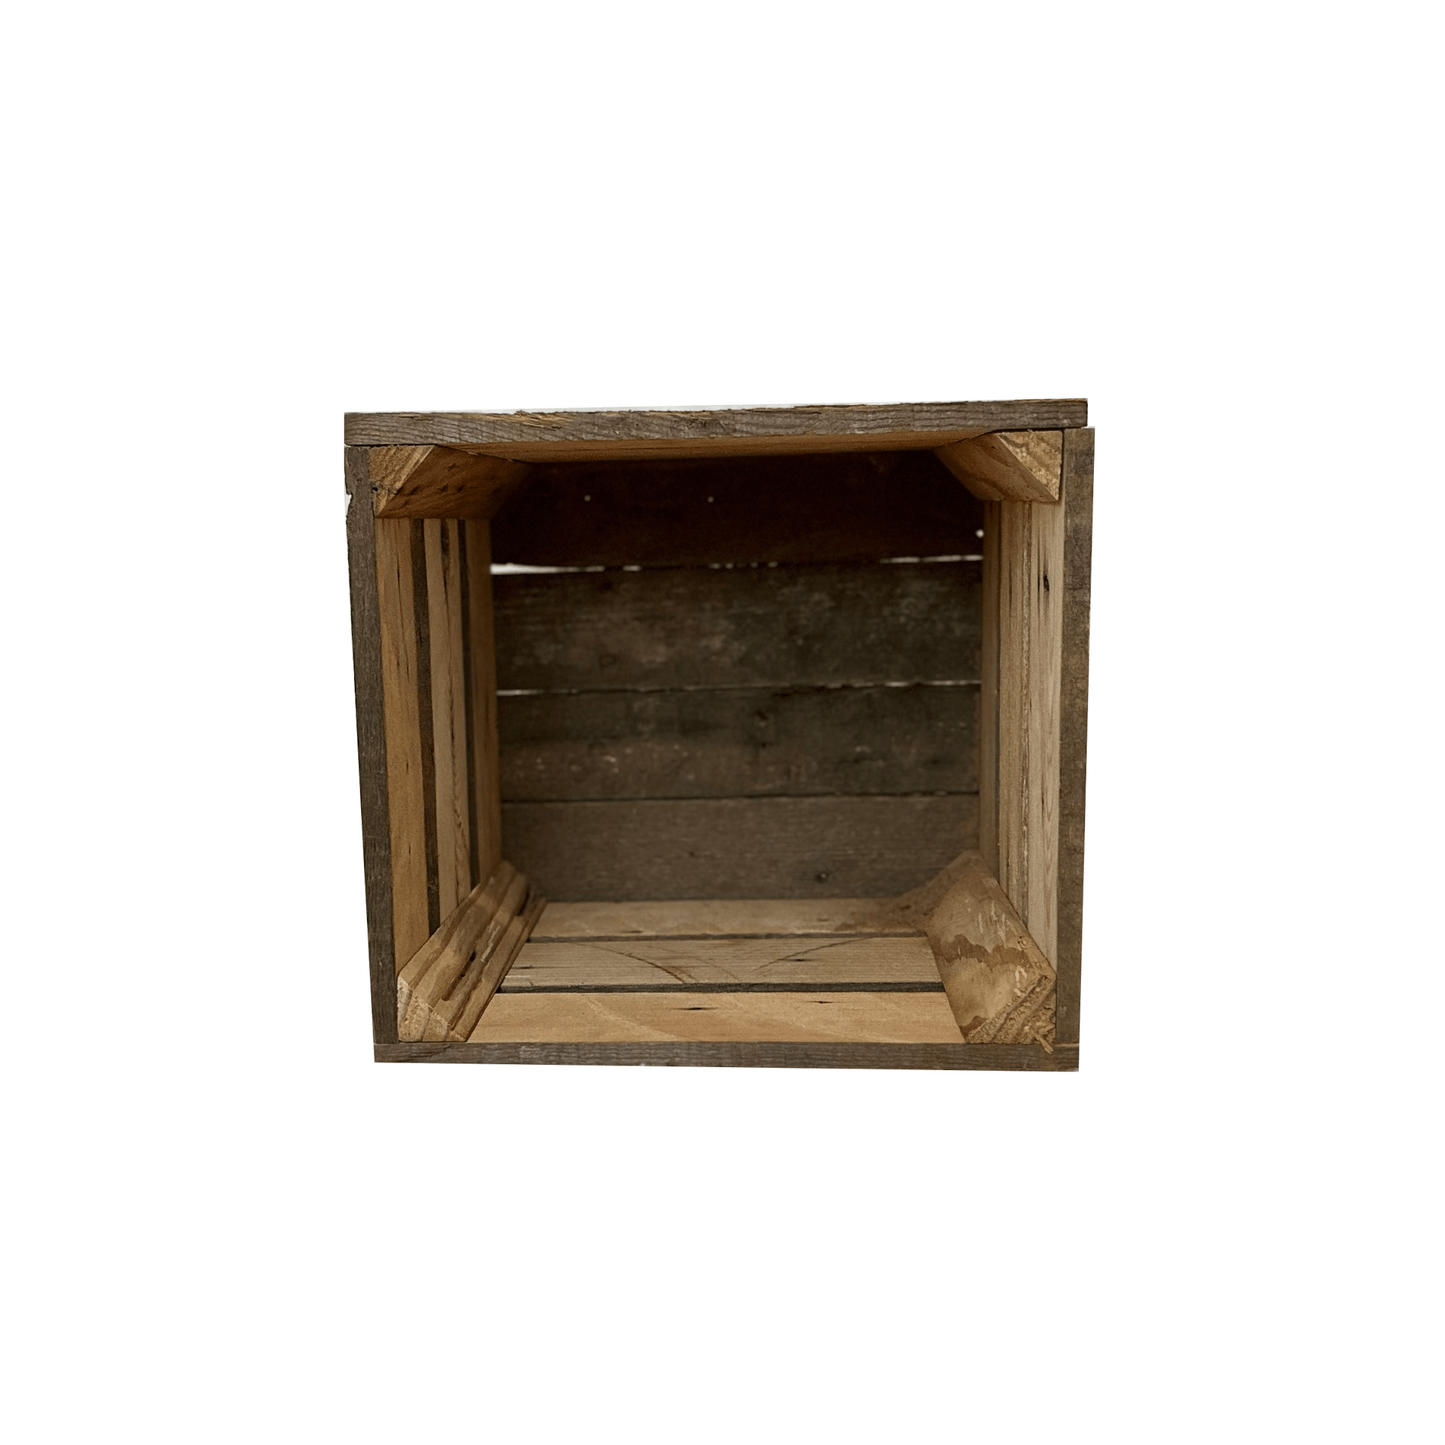 inside of the reclaimed wood crate showing corner supports and variance in wood. There are four slats across the bottom with a small space in between.